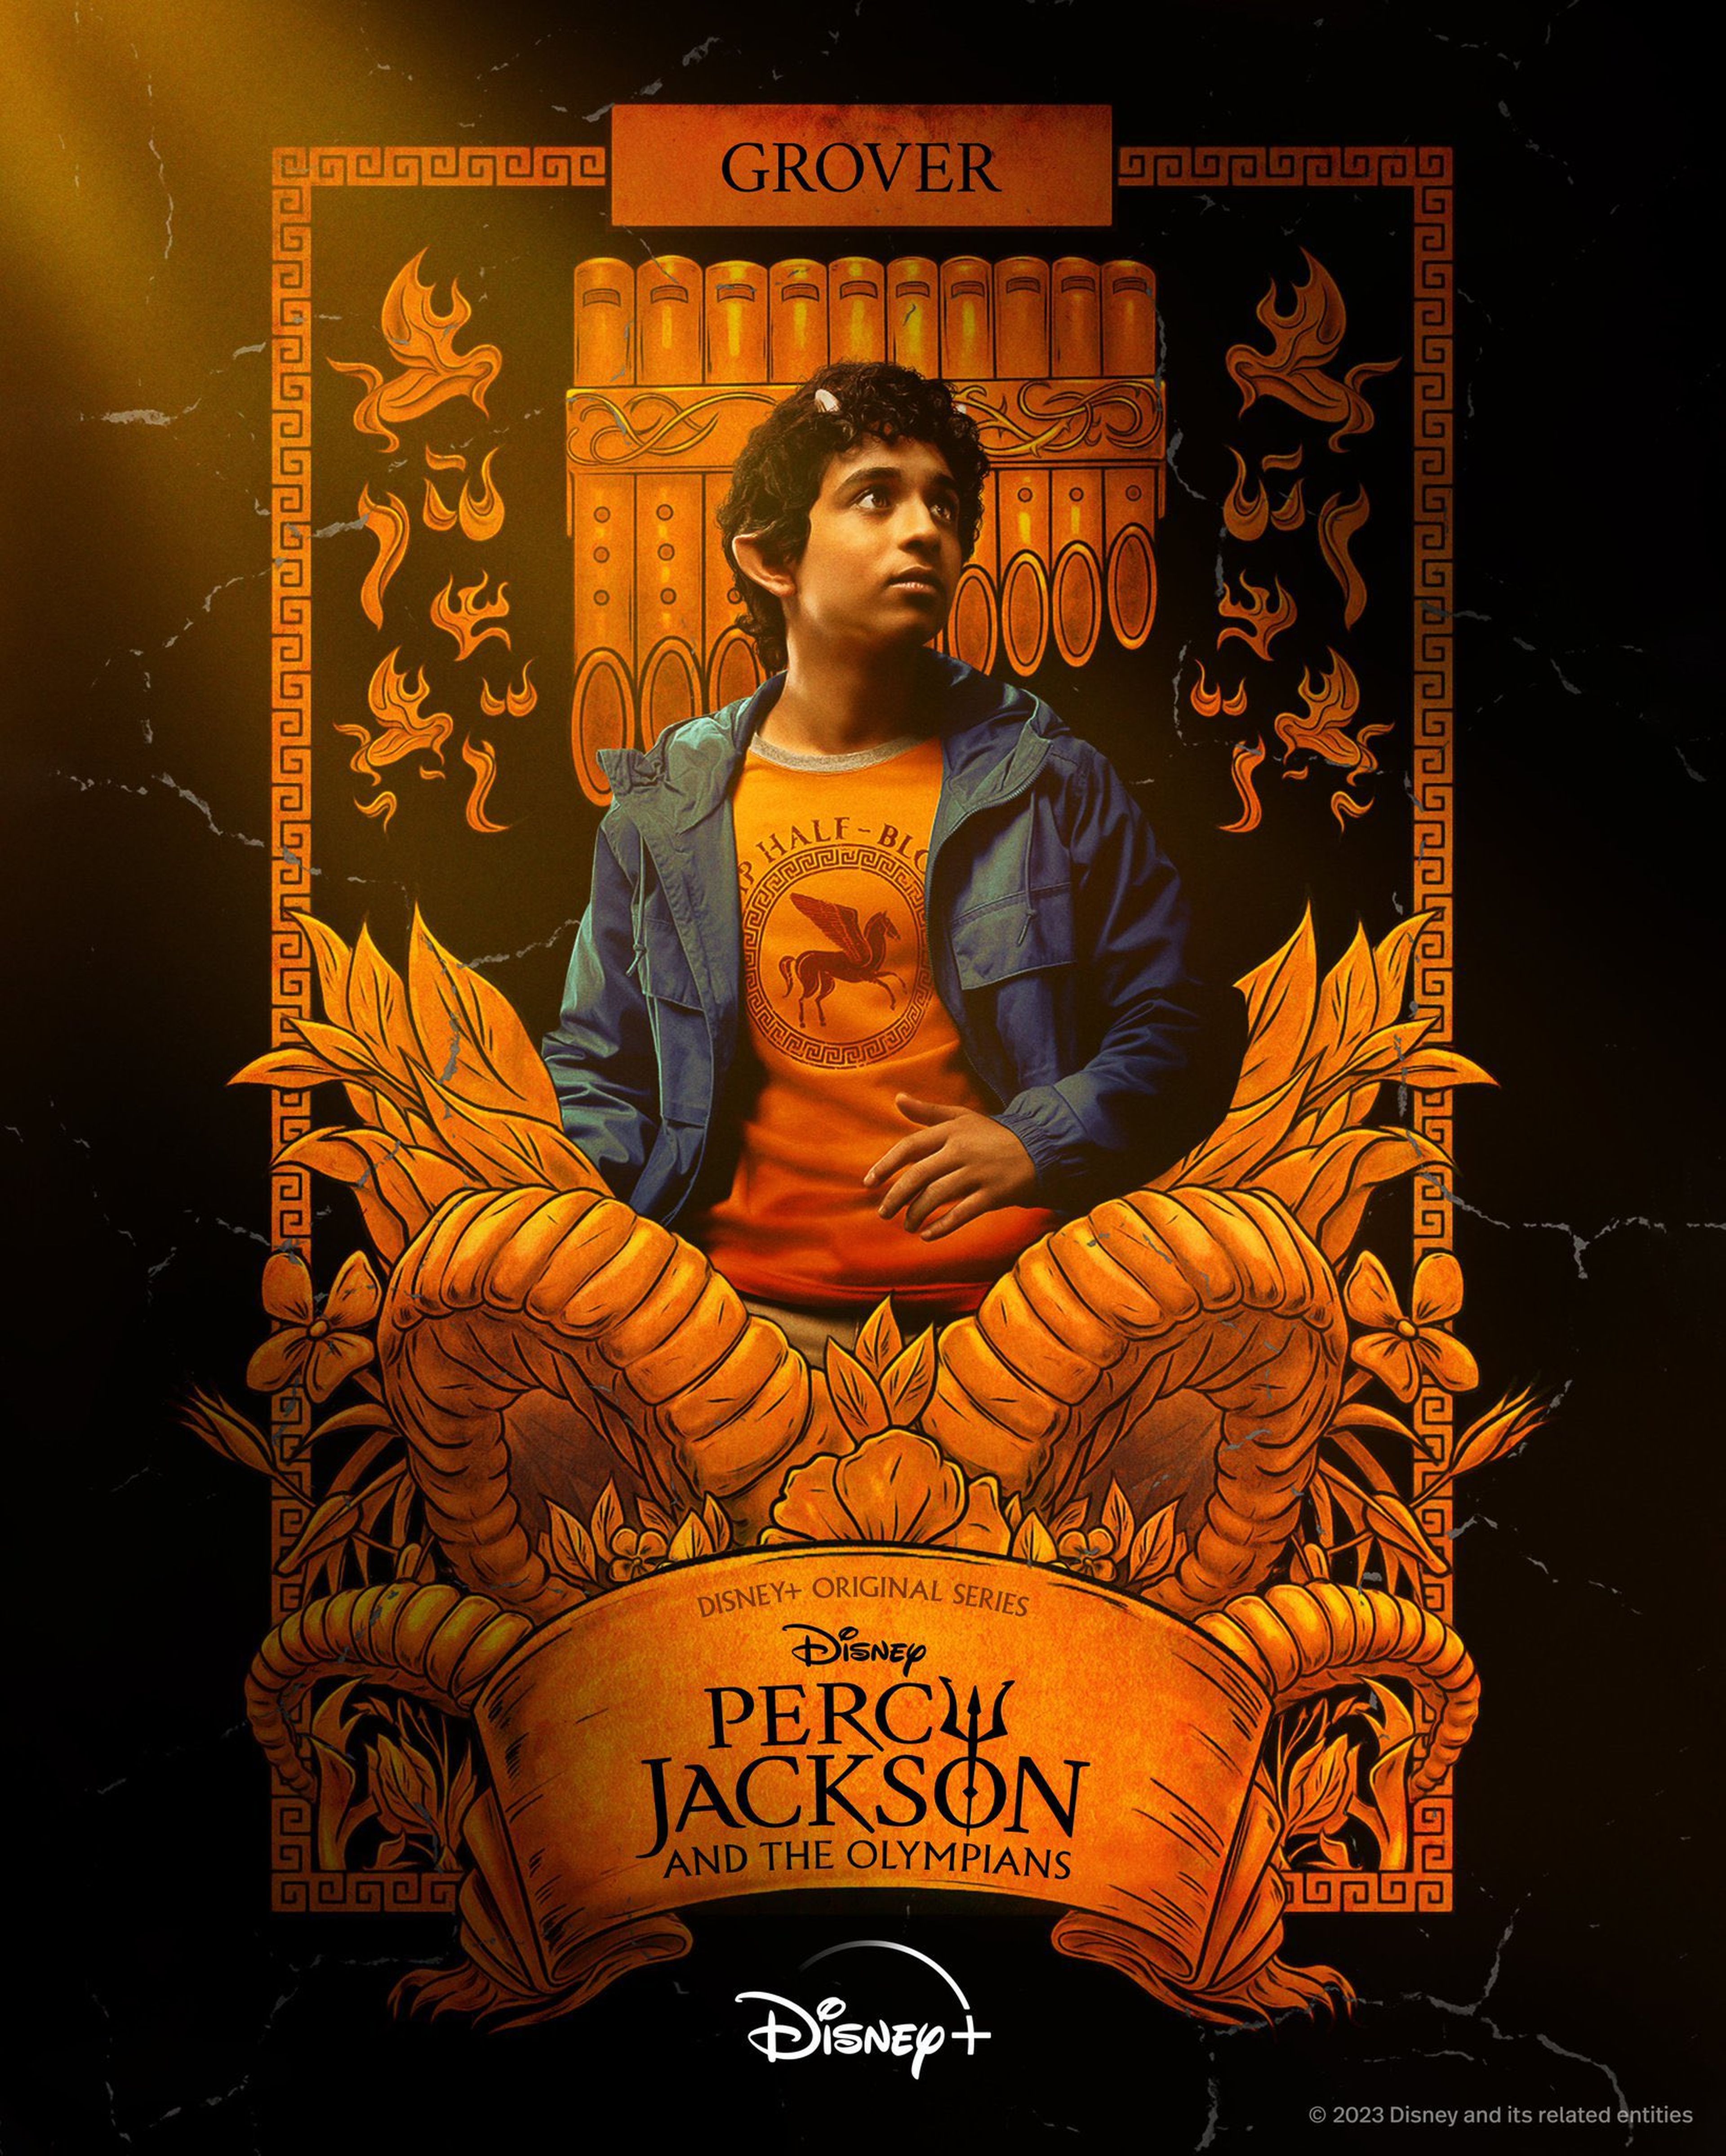 Pósteres individuales de Percy Jackson and the Olympians